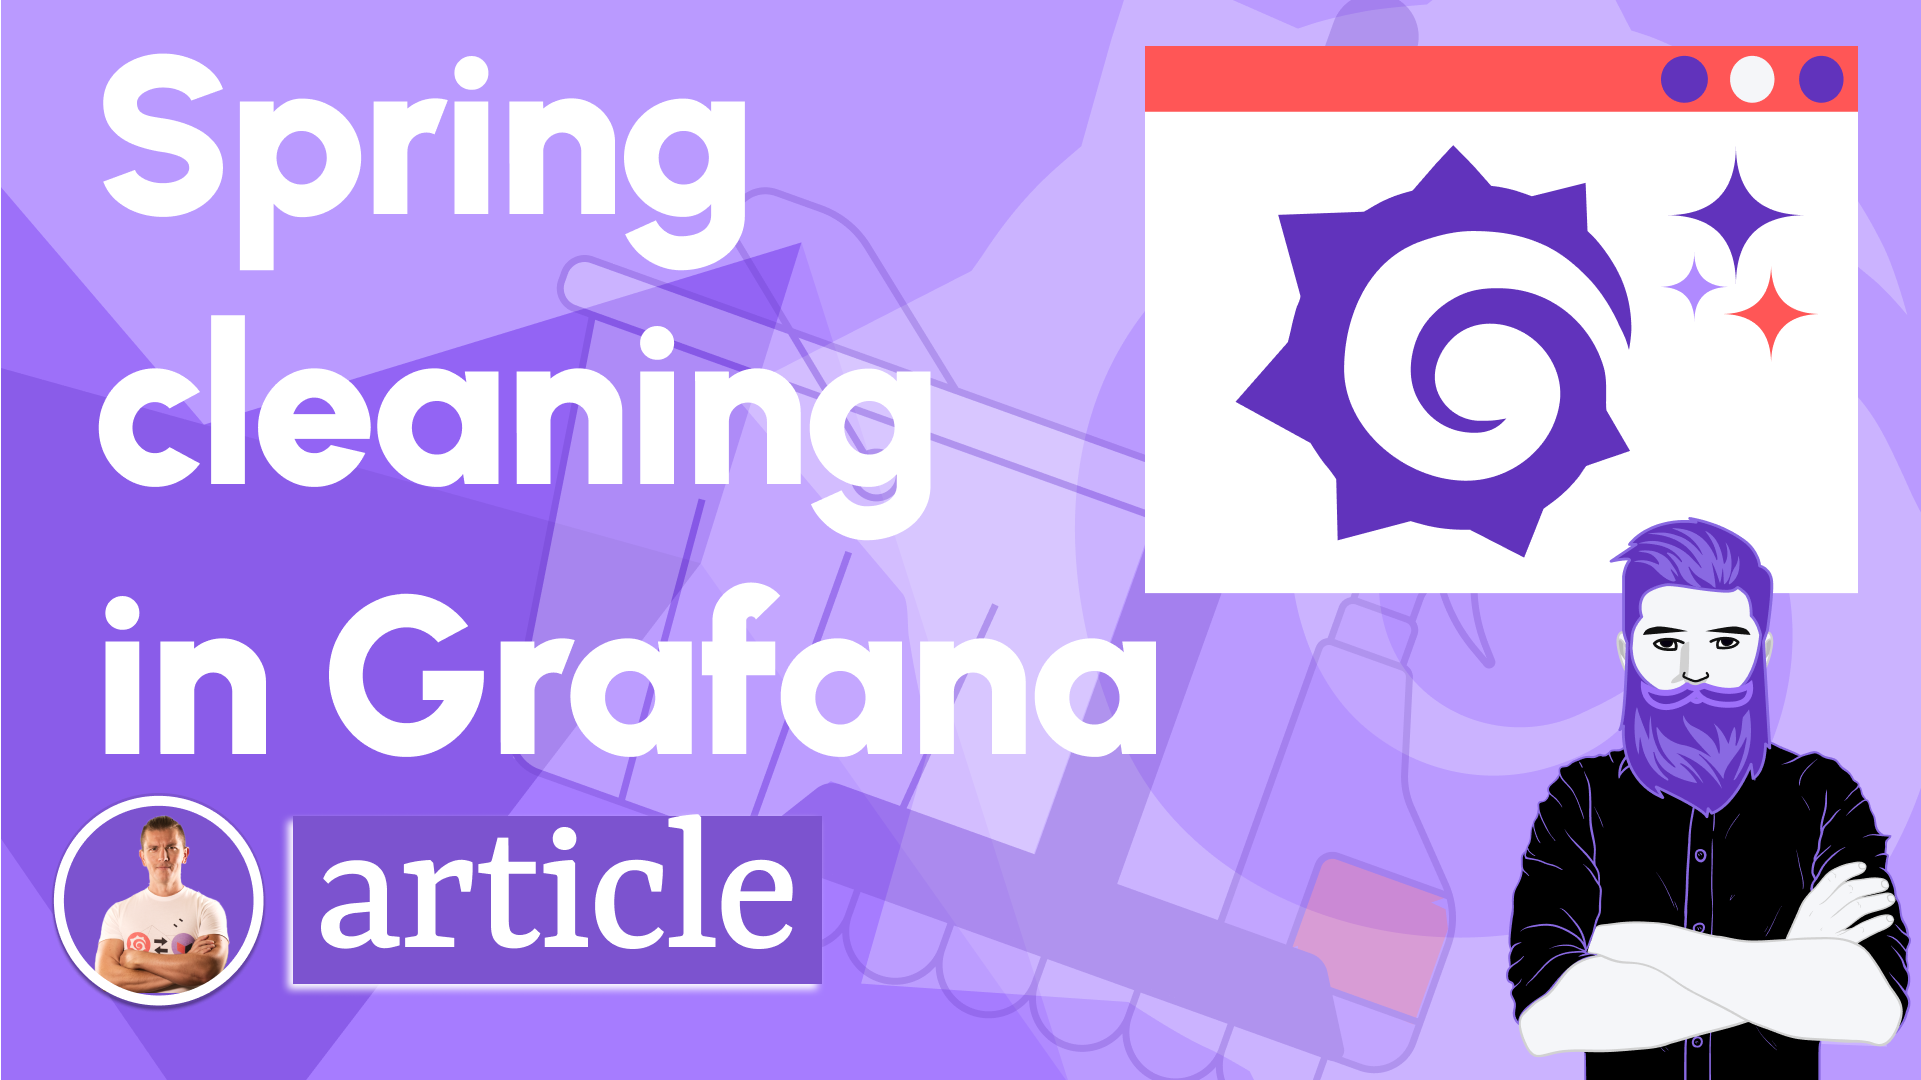 Spring cleaning in Grafana.